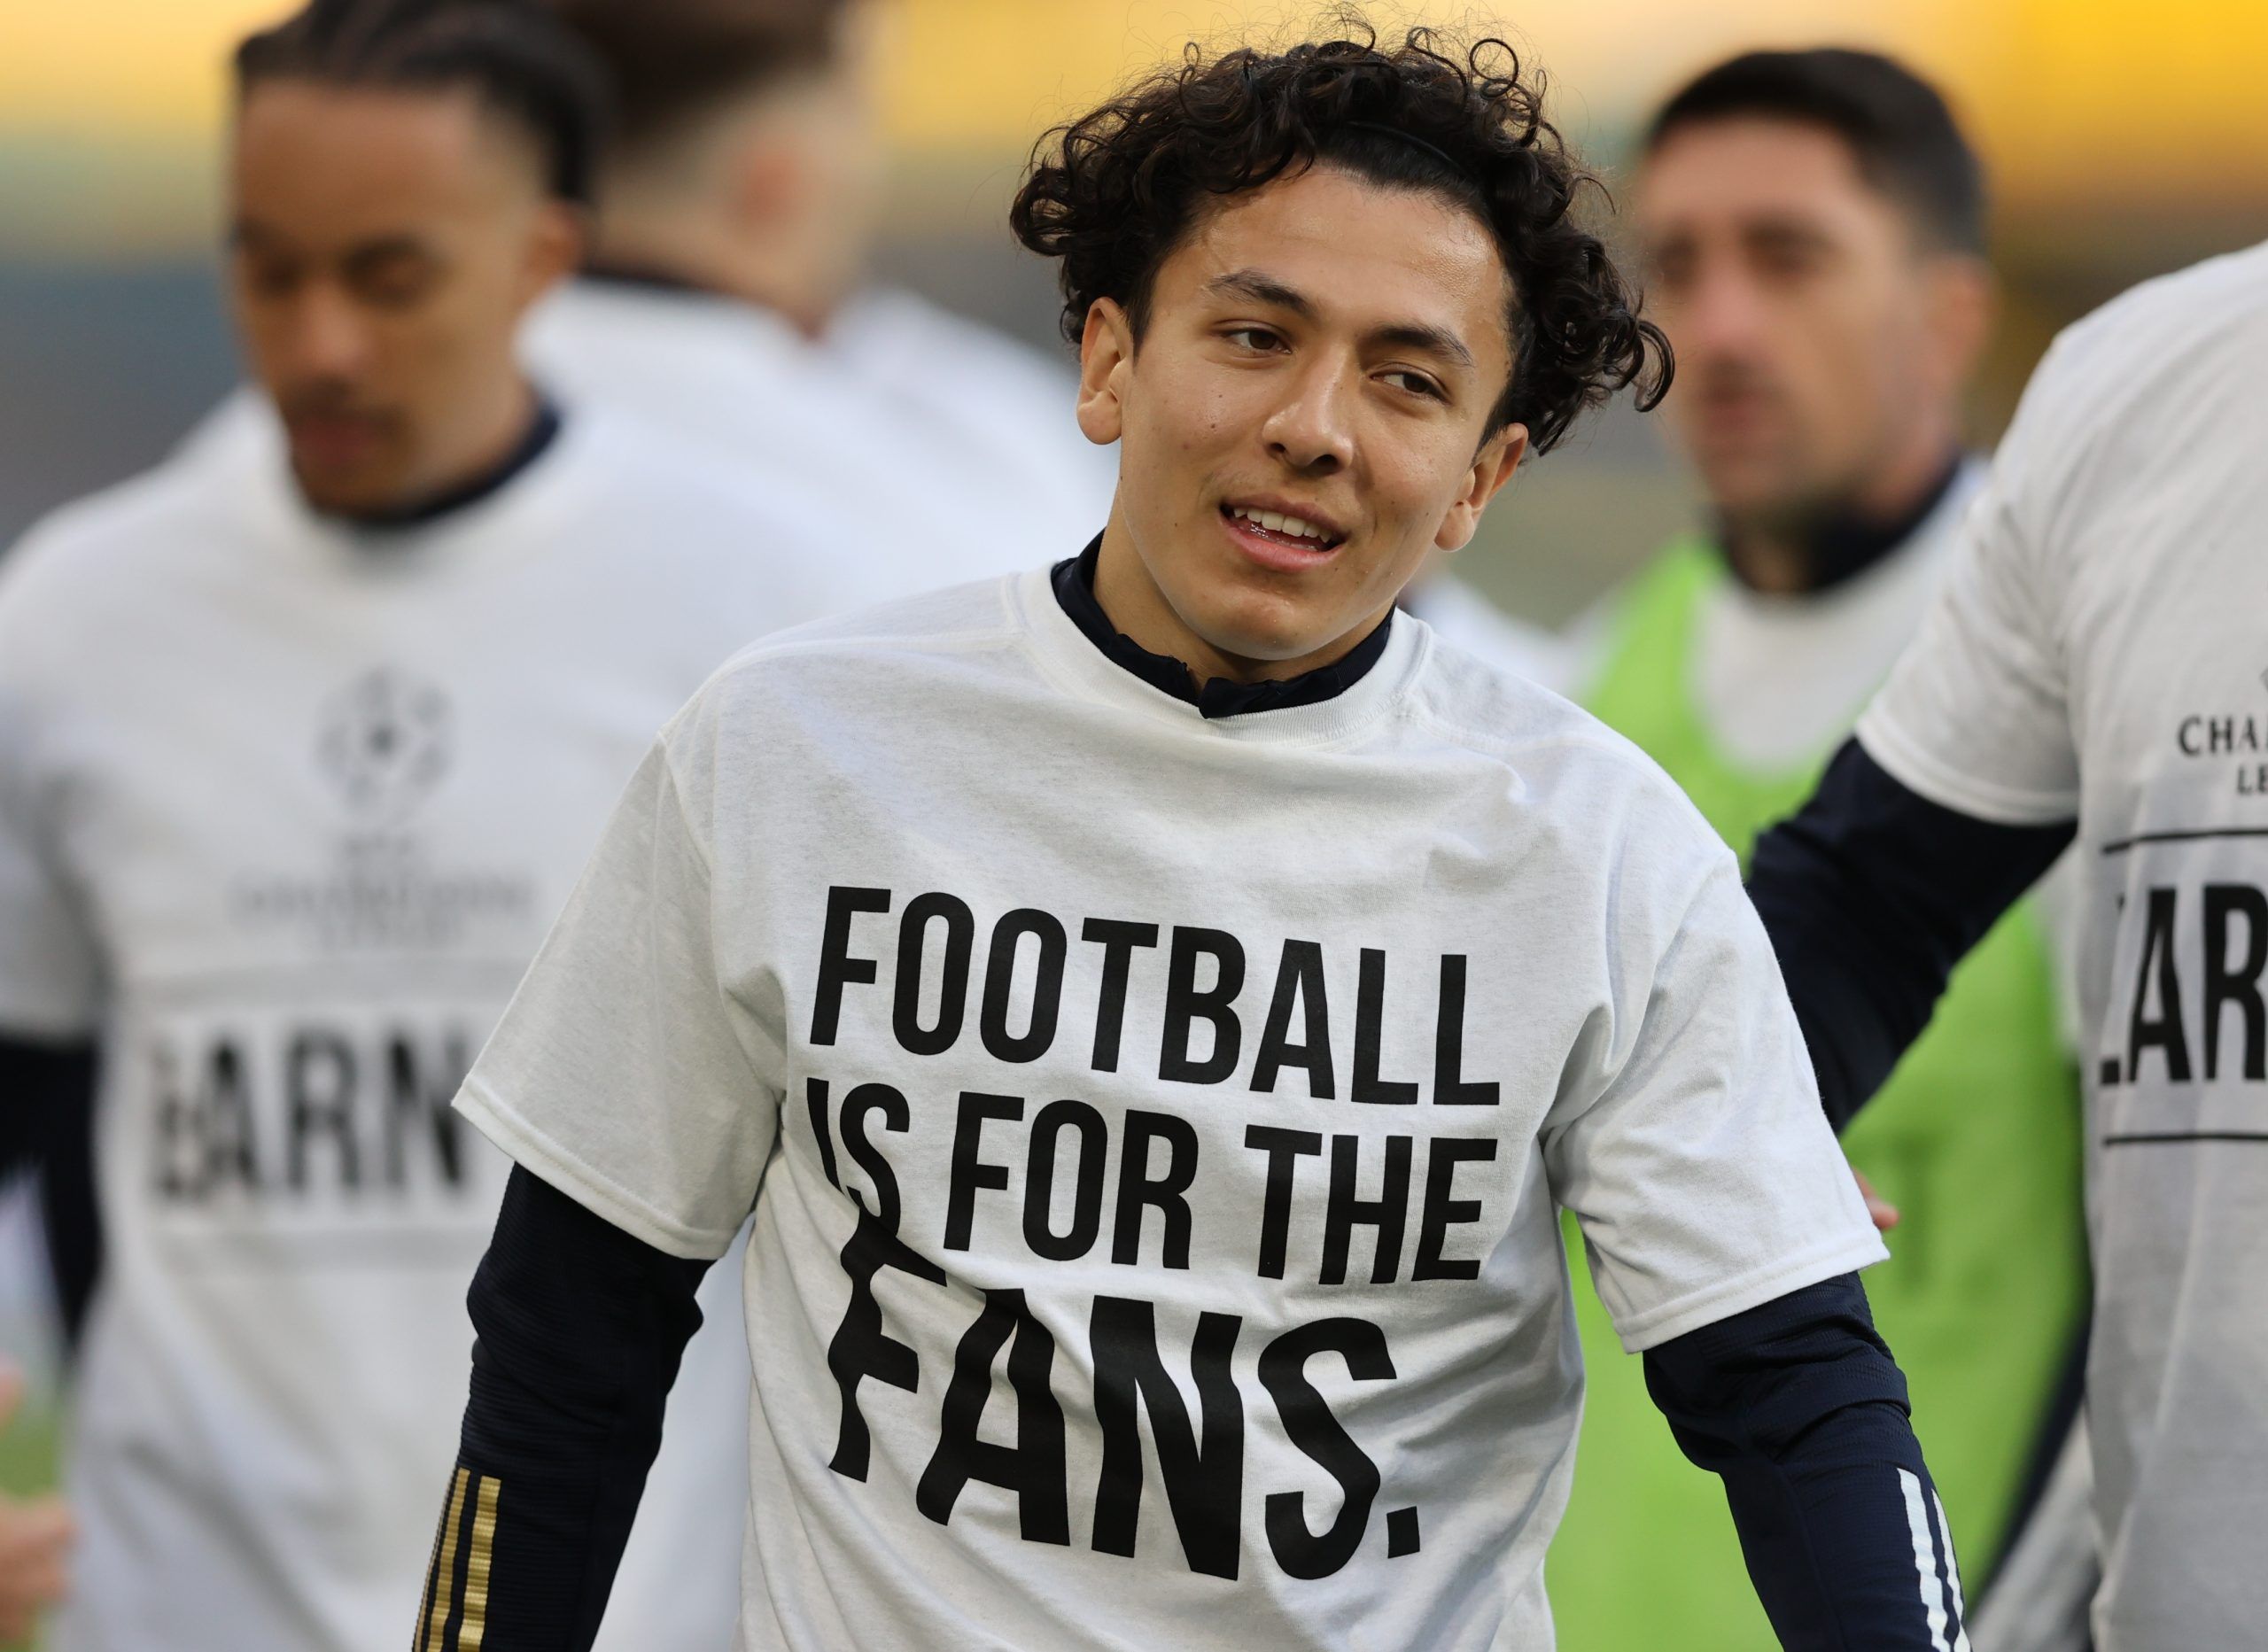 Soccer Football - Premier League - Leeds United v Liverpool - Elland Road, Leeds, Britain - April 19, 2021 Leeds United's Ian Poveda during the warm up before the match wearing UEFA Champions League T- Shirt with the message saying Football is for the Fans Pool via REUTERS/Clive Brunskill EDITORIAL USE ONLY. No use with unauthorized audio, video, data, fixture lists, club/league logos or 'live' services. Online in-match use limited to 75 images, no video emulation. No use in betting, games or si